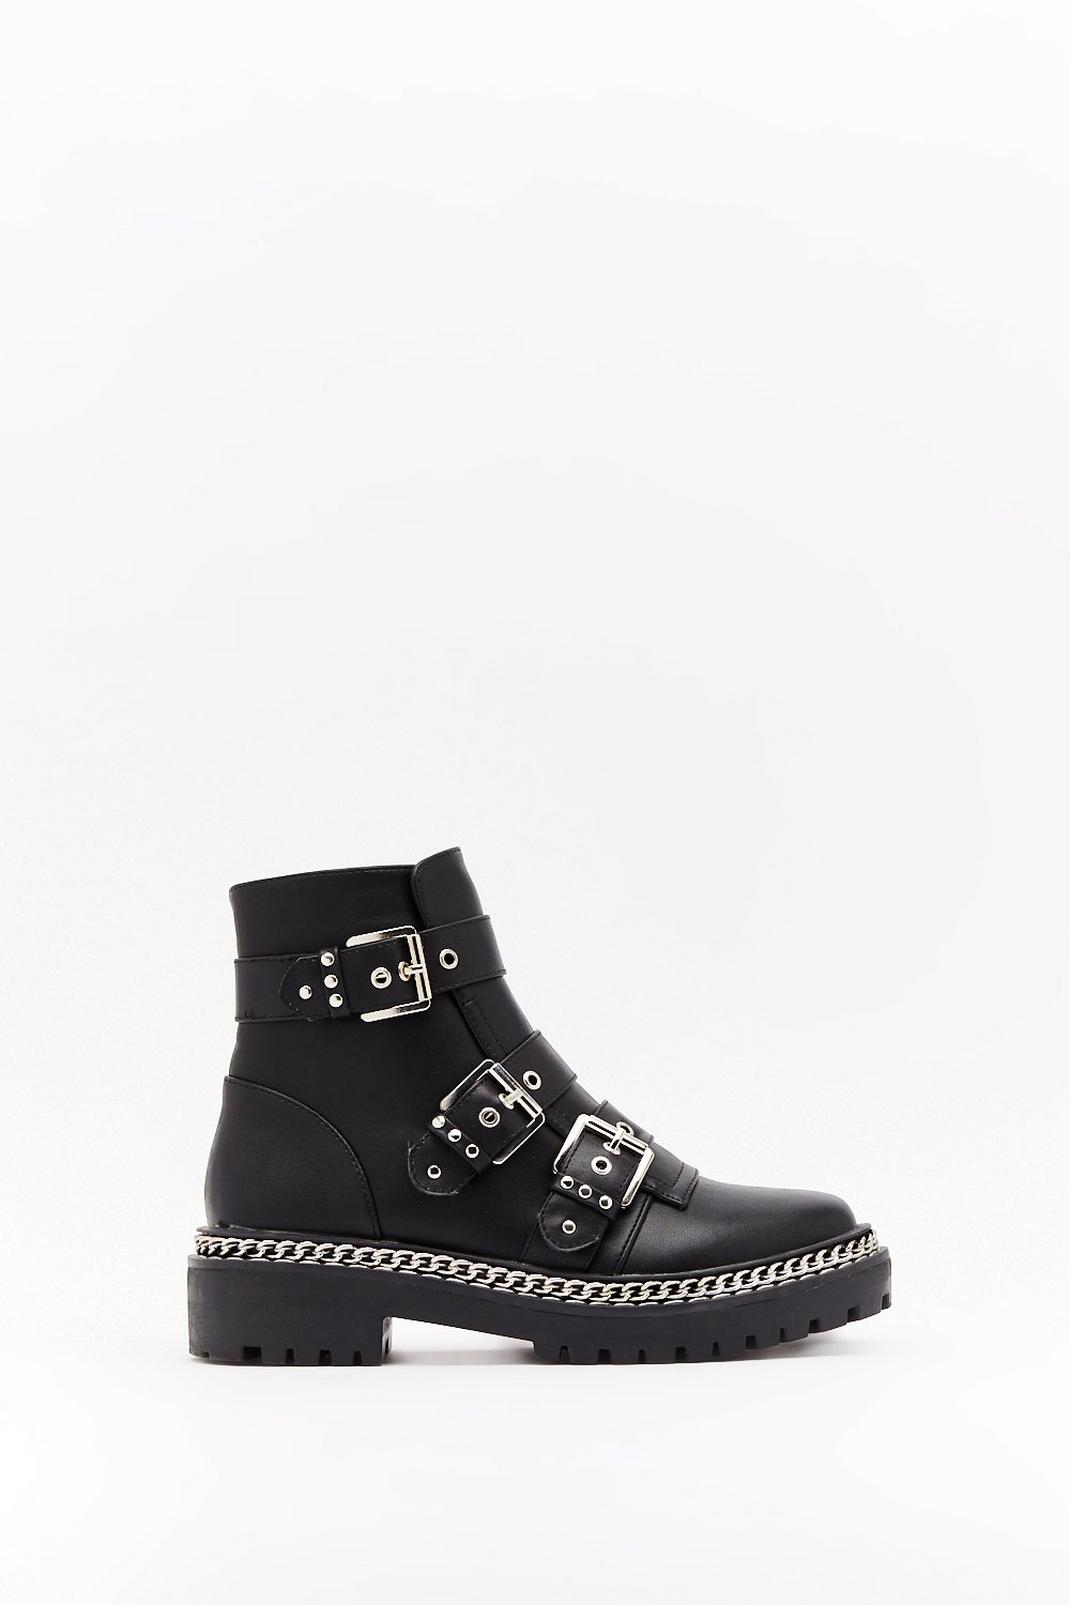 Third Time Lucky Faux Leather Buckle Boots image number 1